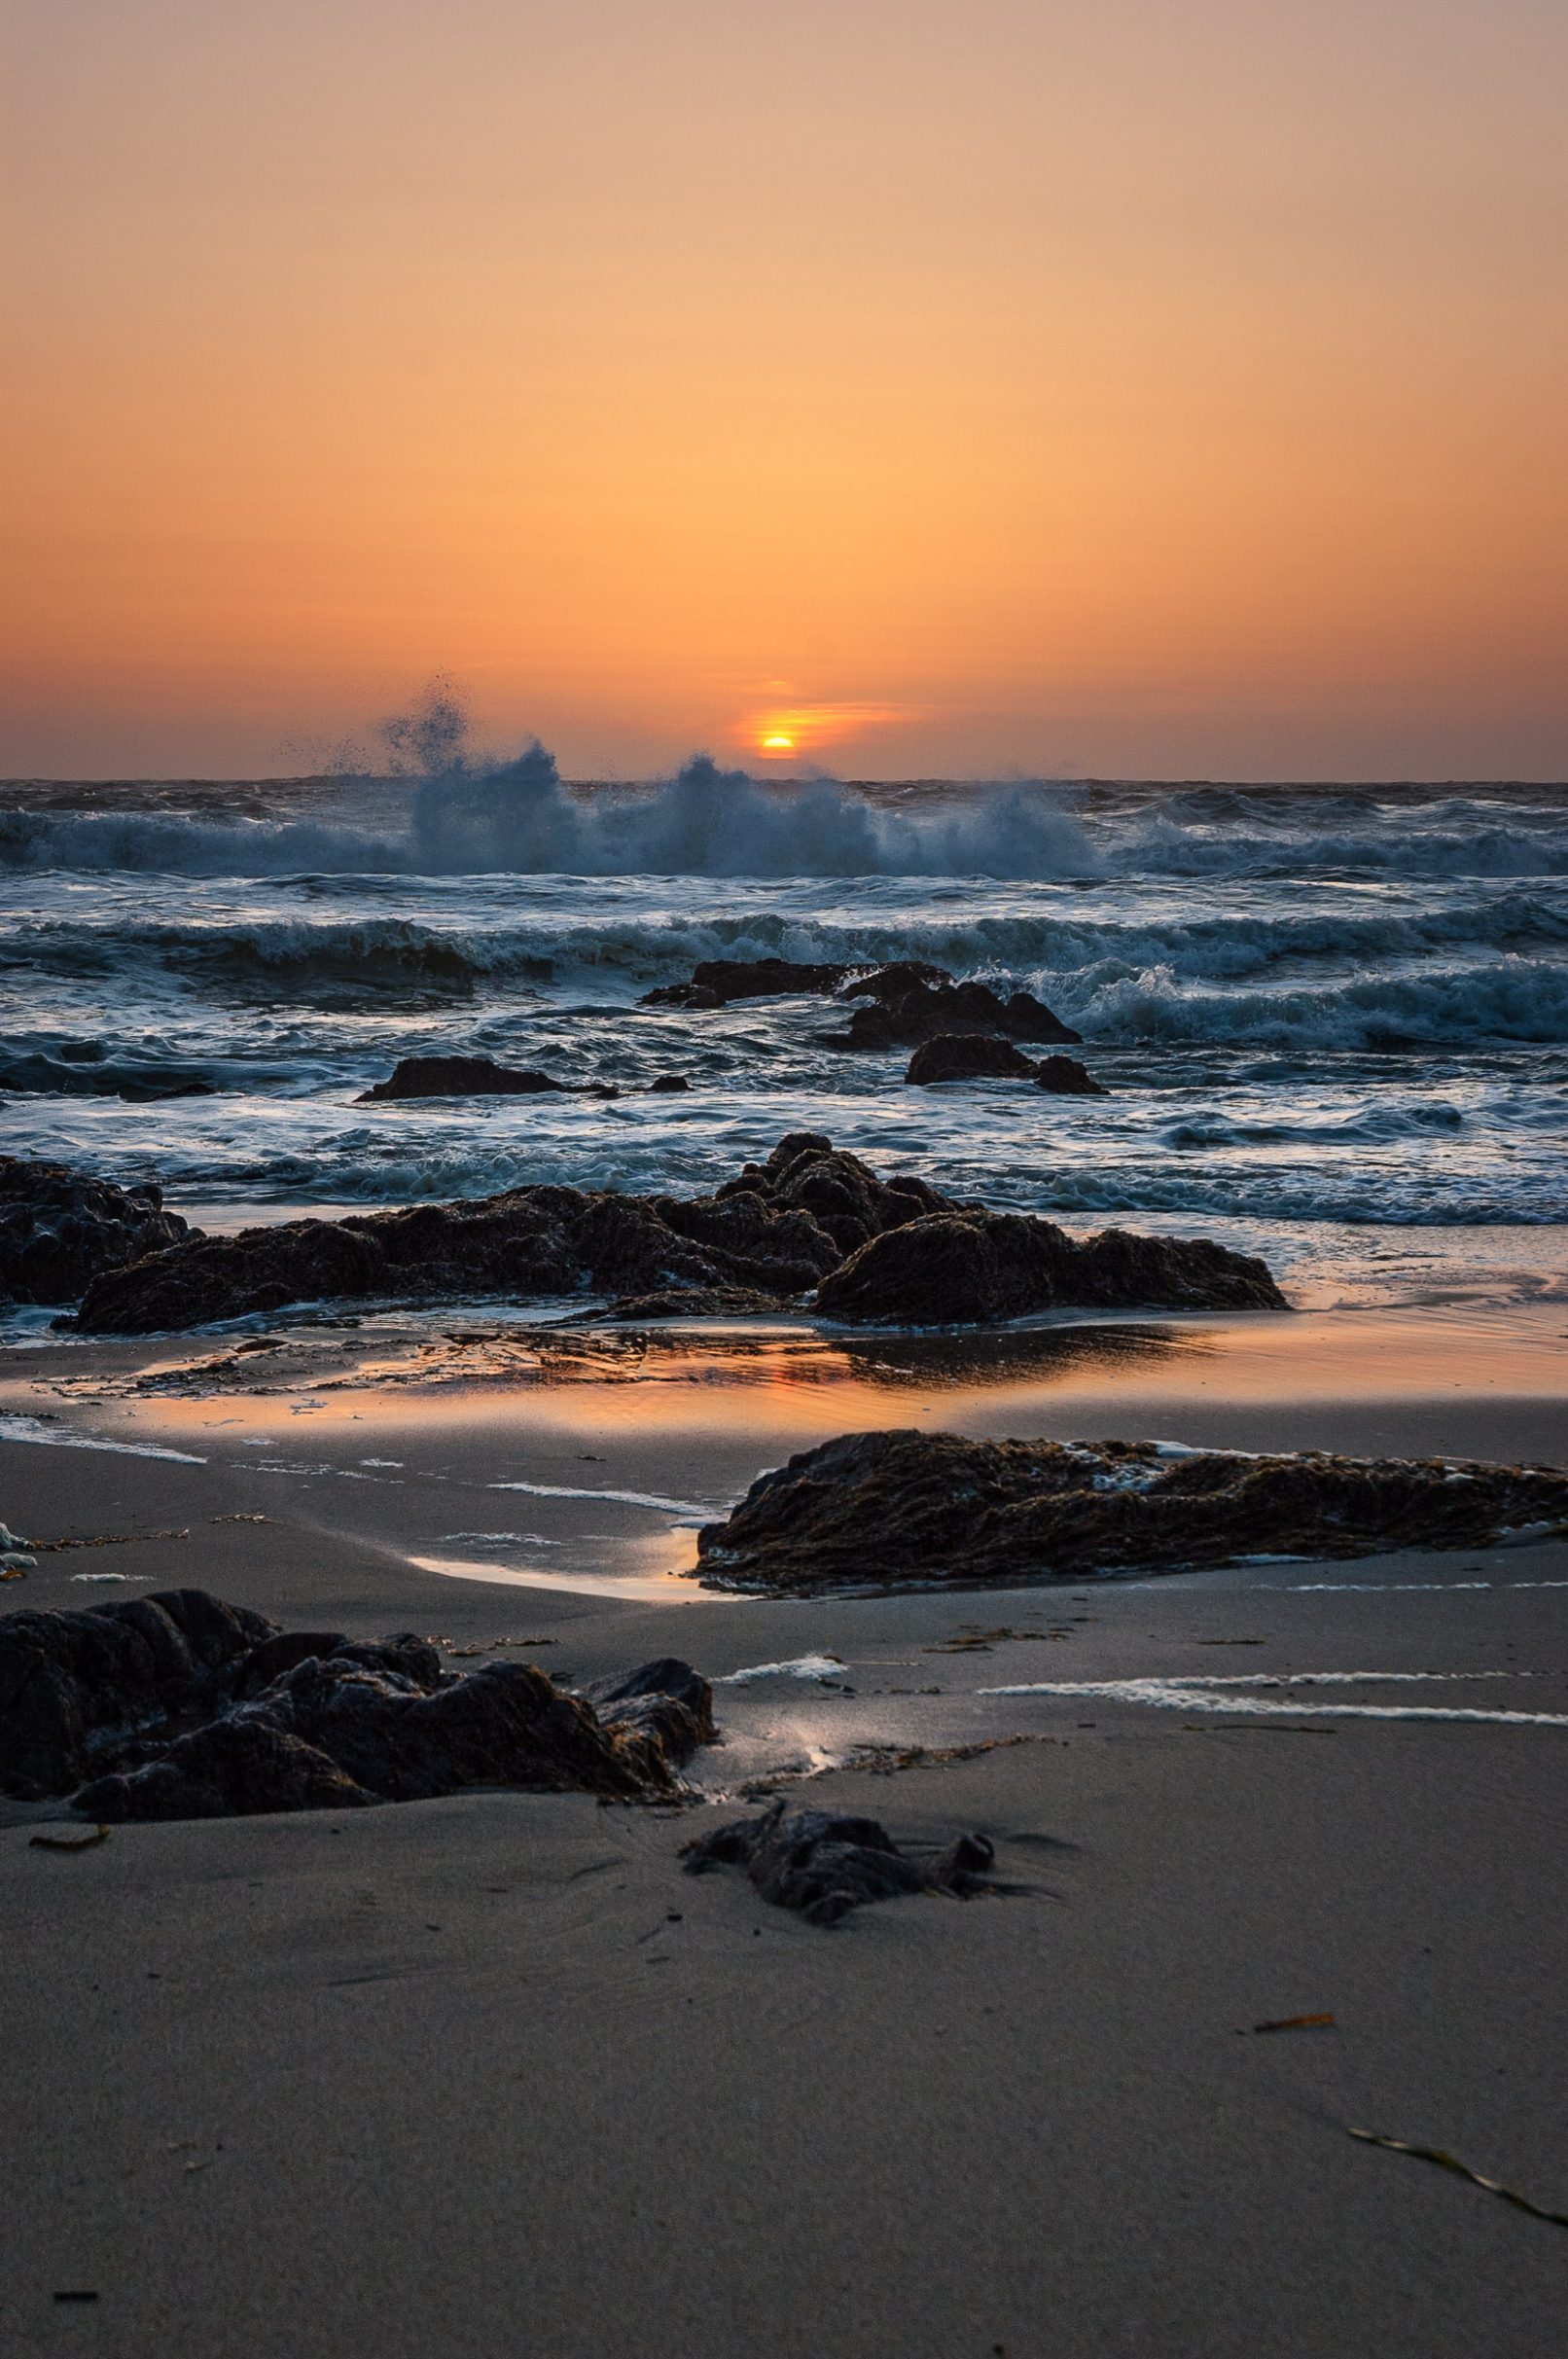 Sunset at California beach with waves and rocks